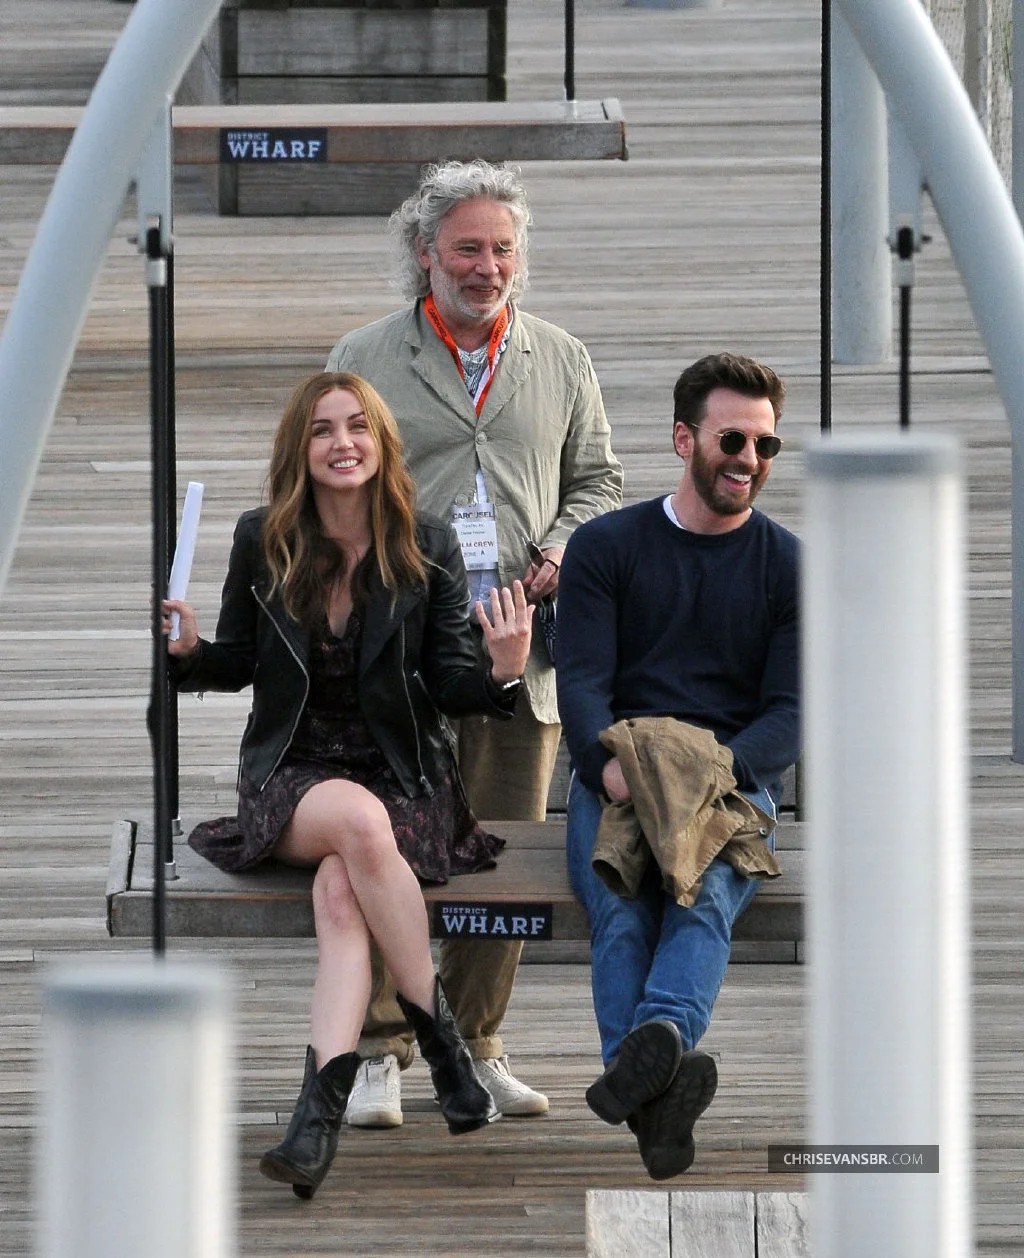 "Ghosted" star Ana de Armas wraps up filming, posts thanks to partner Chris Evans